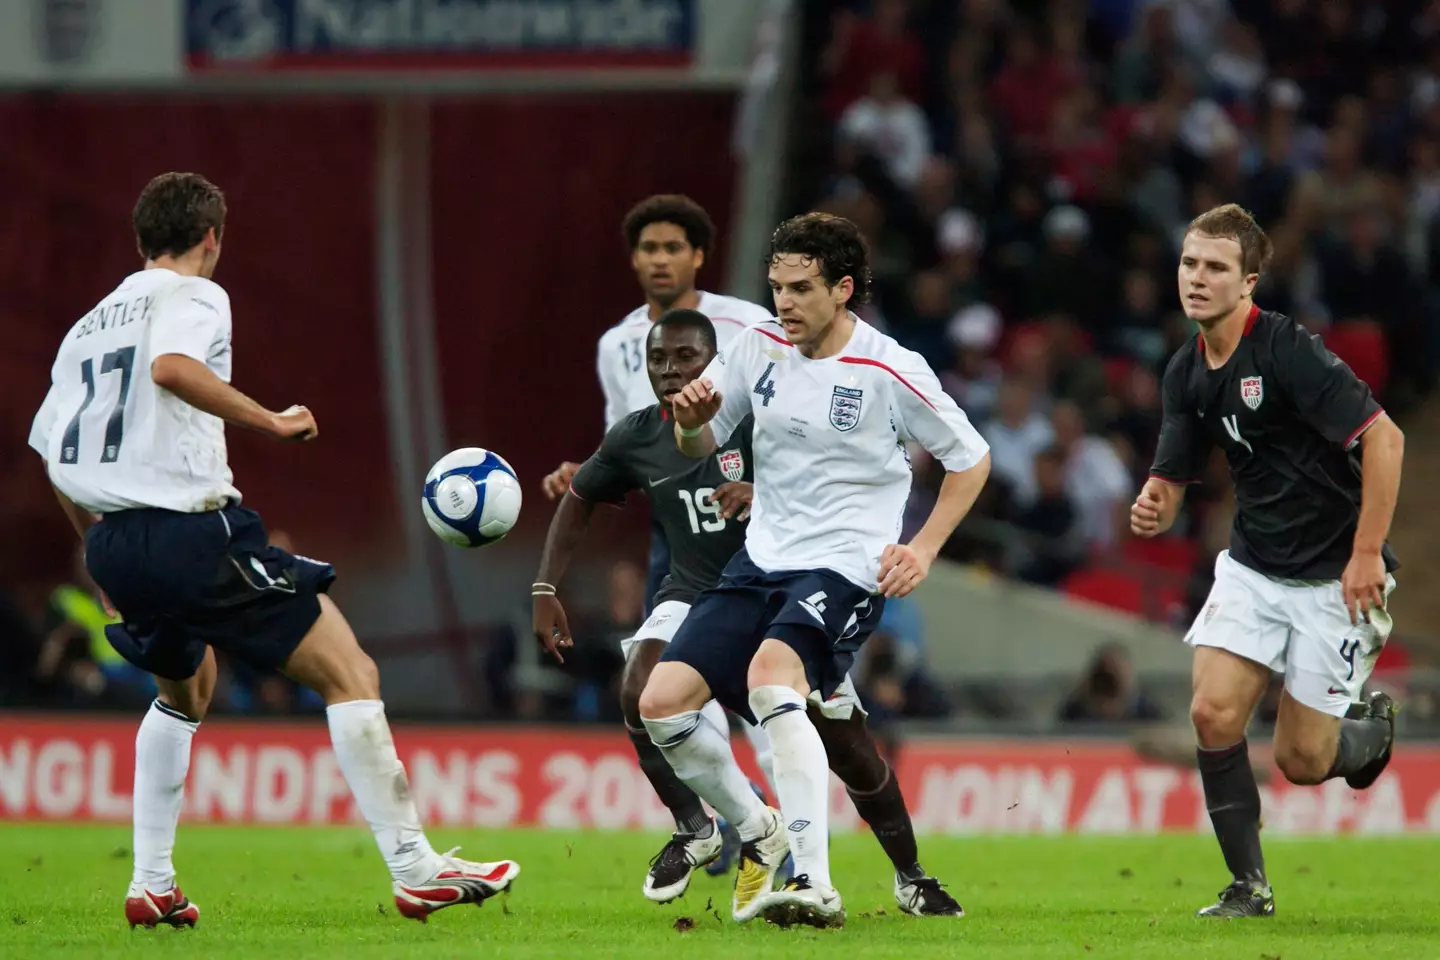 Owen Hargreaves in action during an international friendly against the United States at Wembley Stadium. (Alamy)